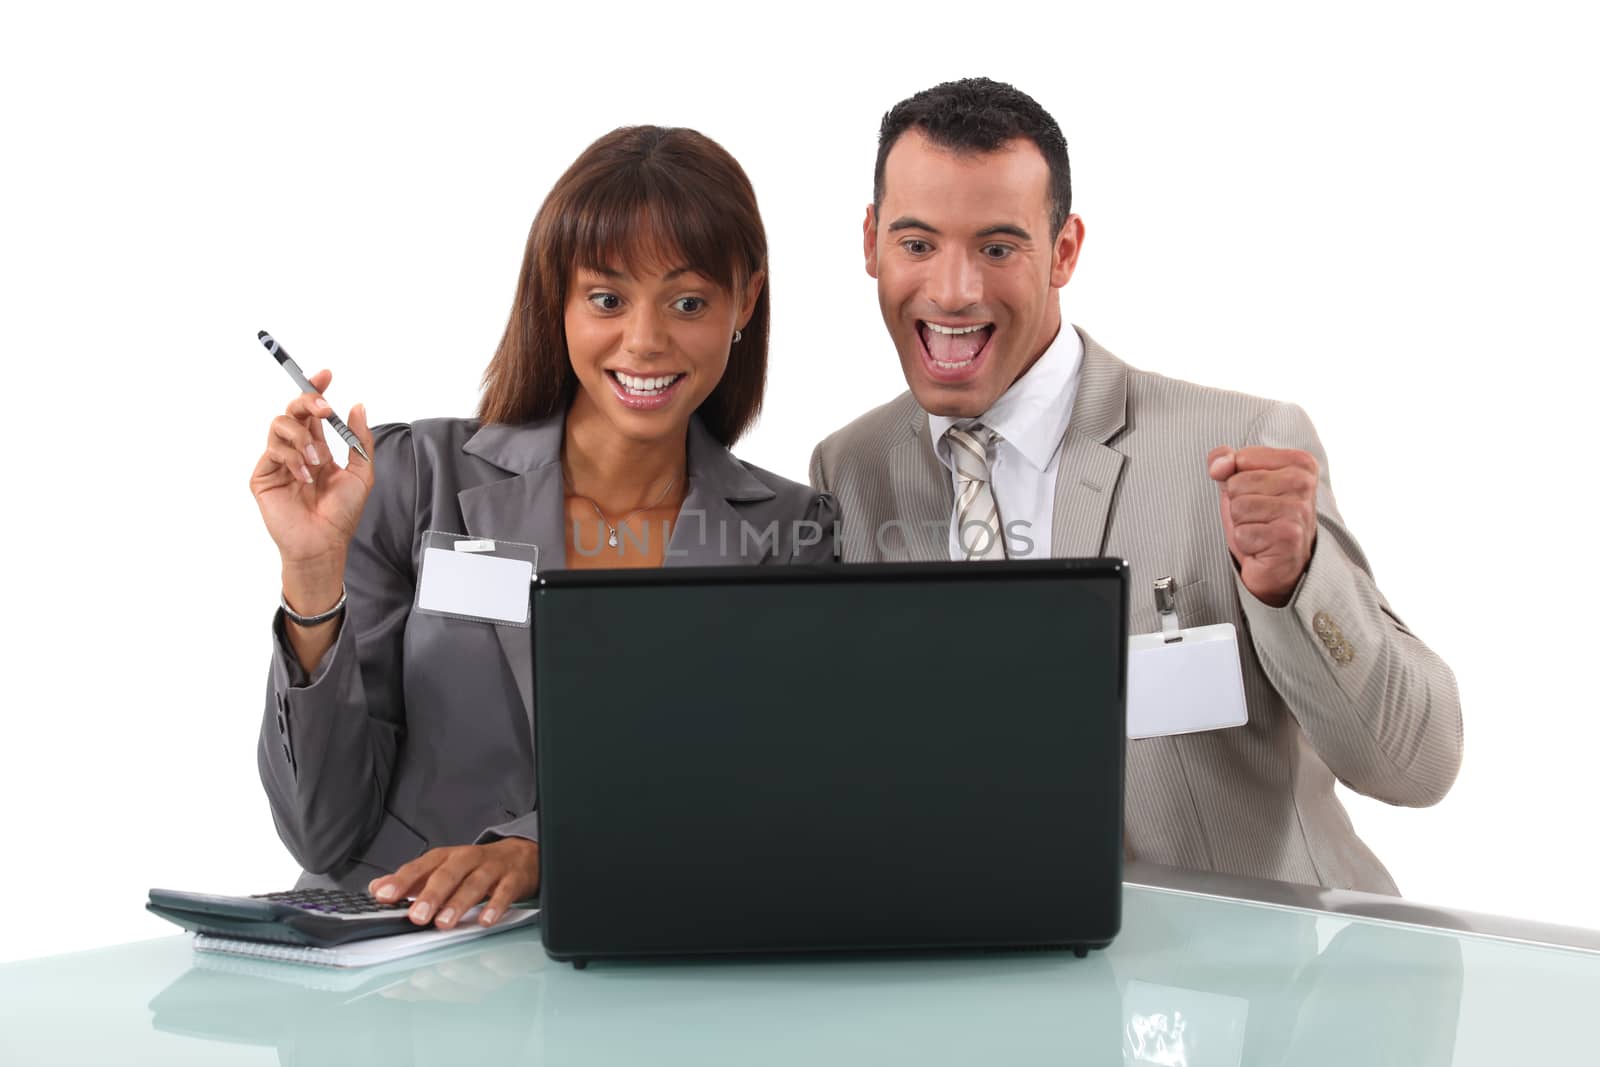 elated business duo with laptop